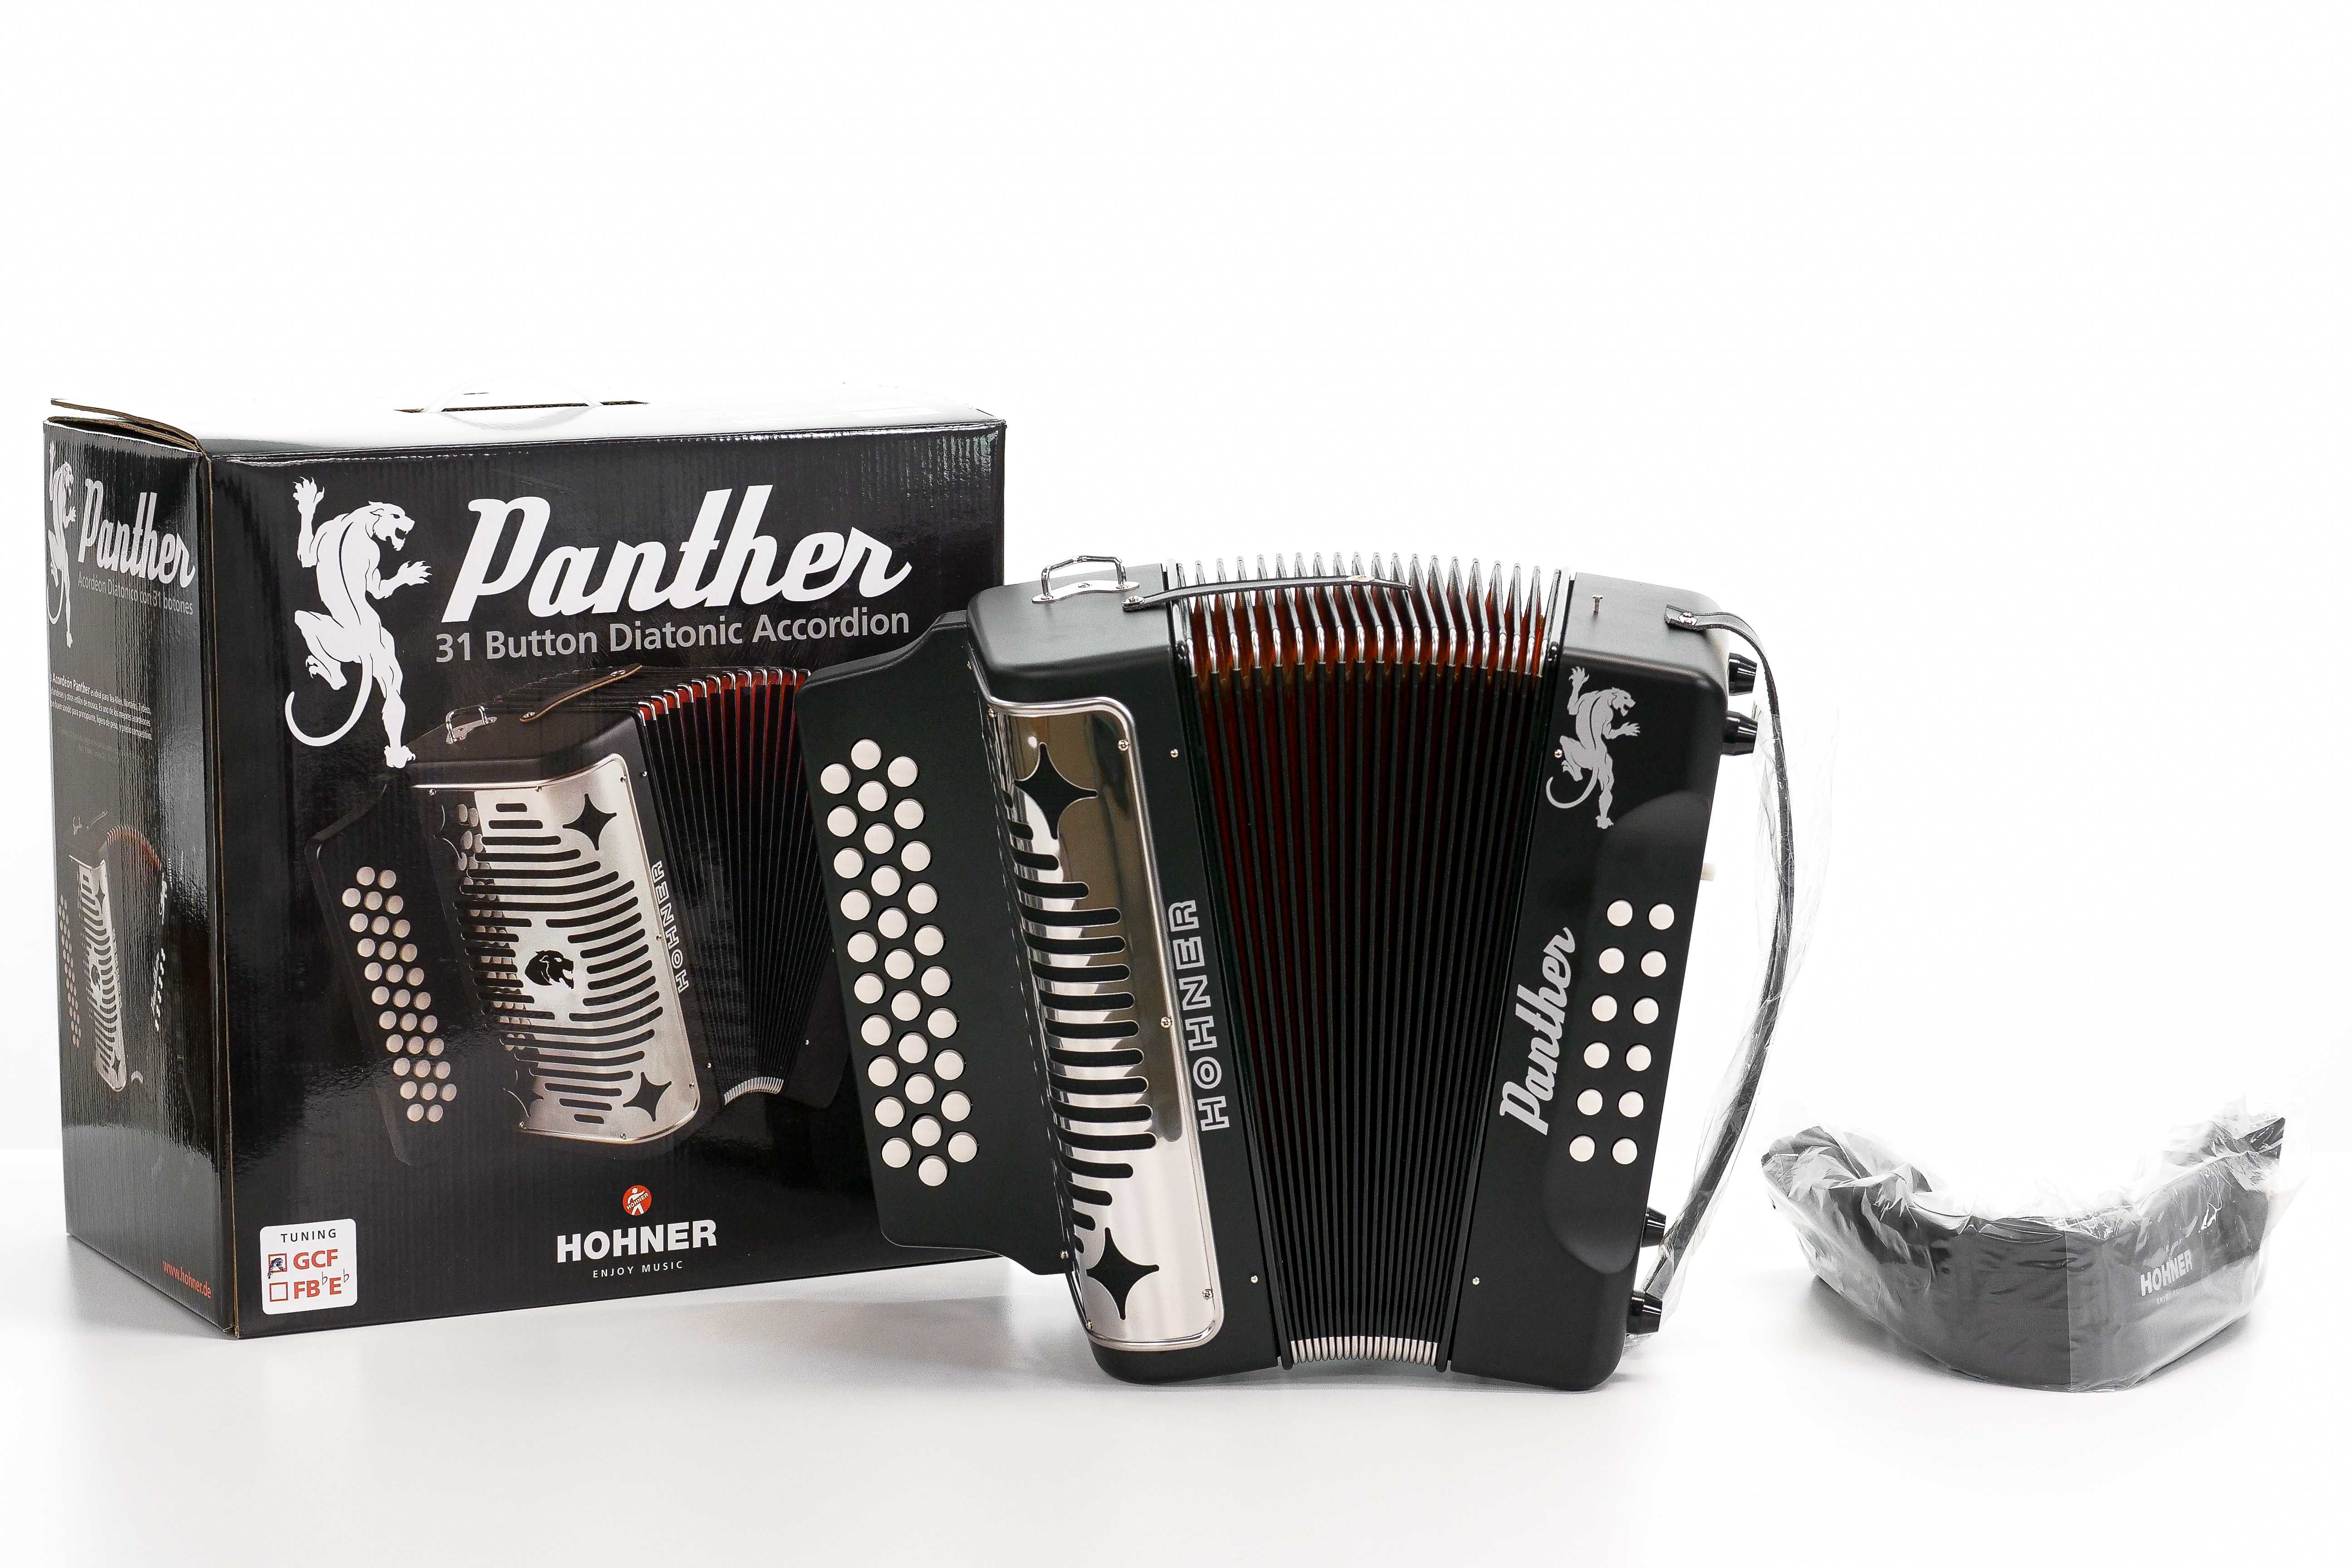 Hohner HA-3100 Panther Accordion - Terry Carter Music Store